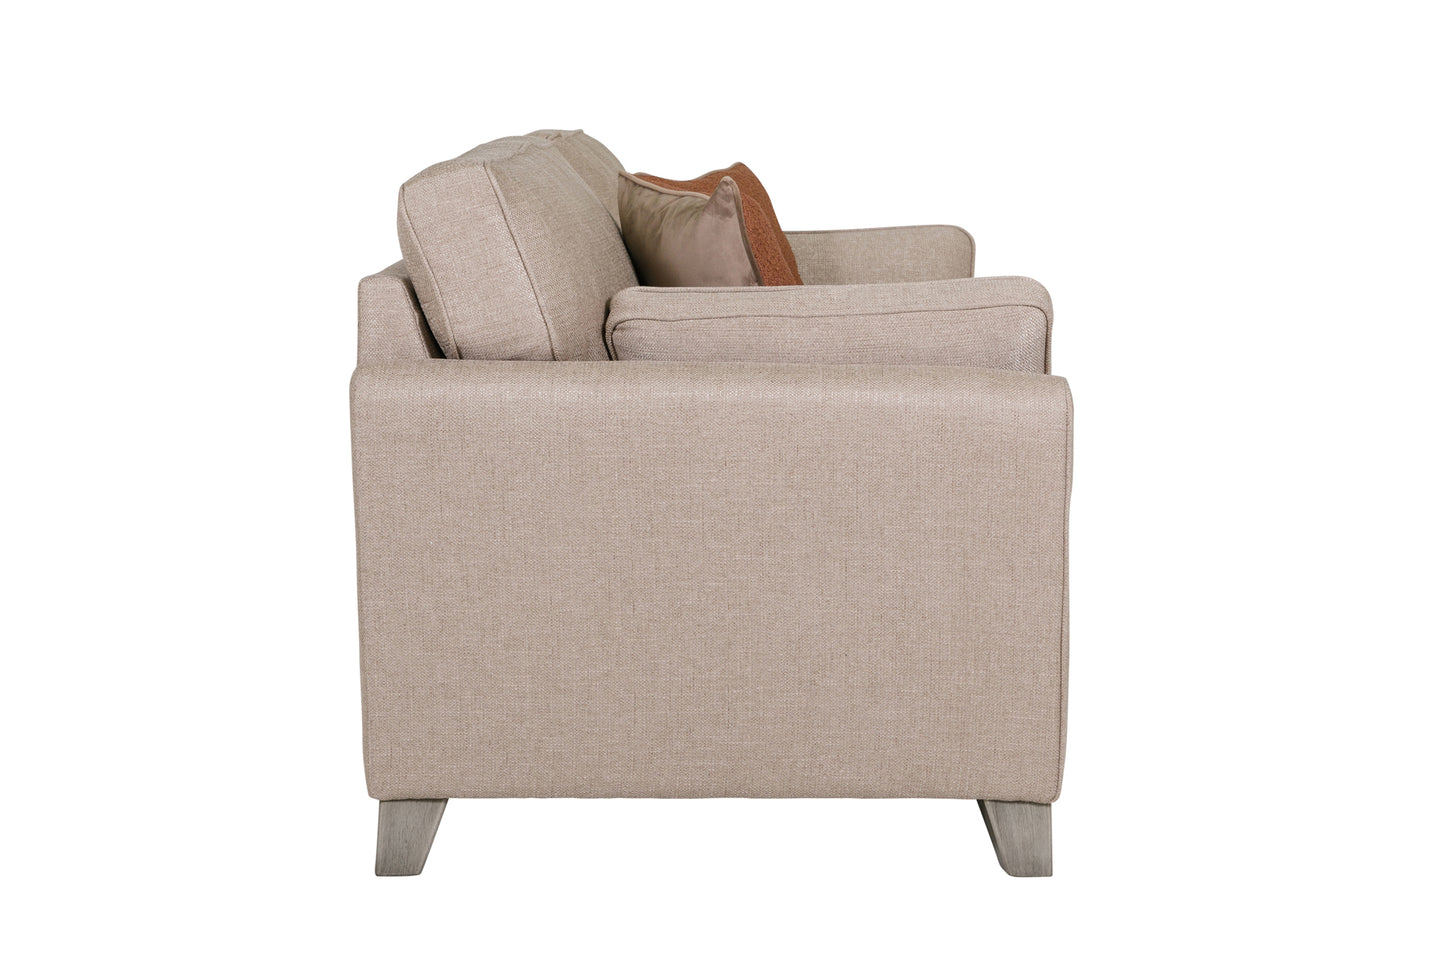 Cantrell 2 Seater Sofa - Biscuit